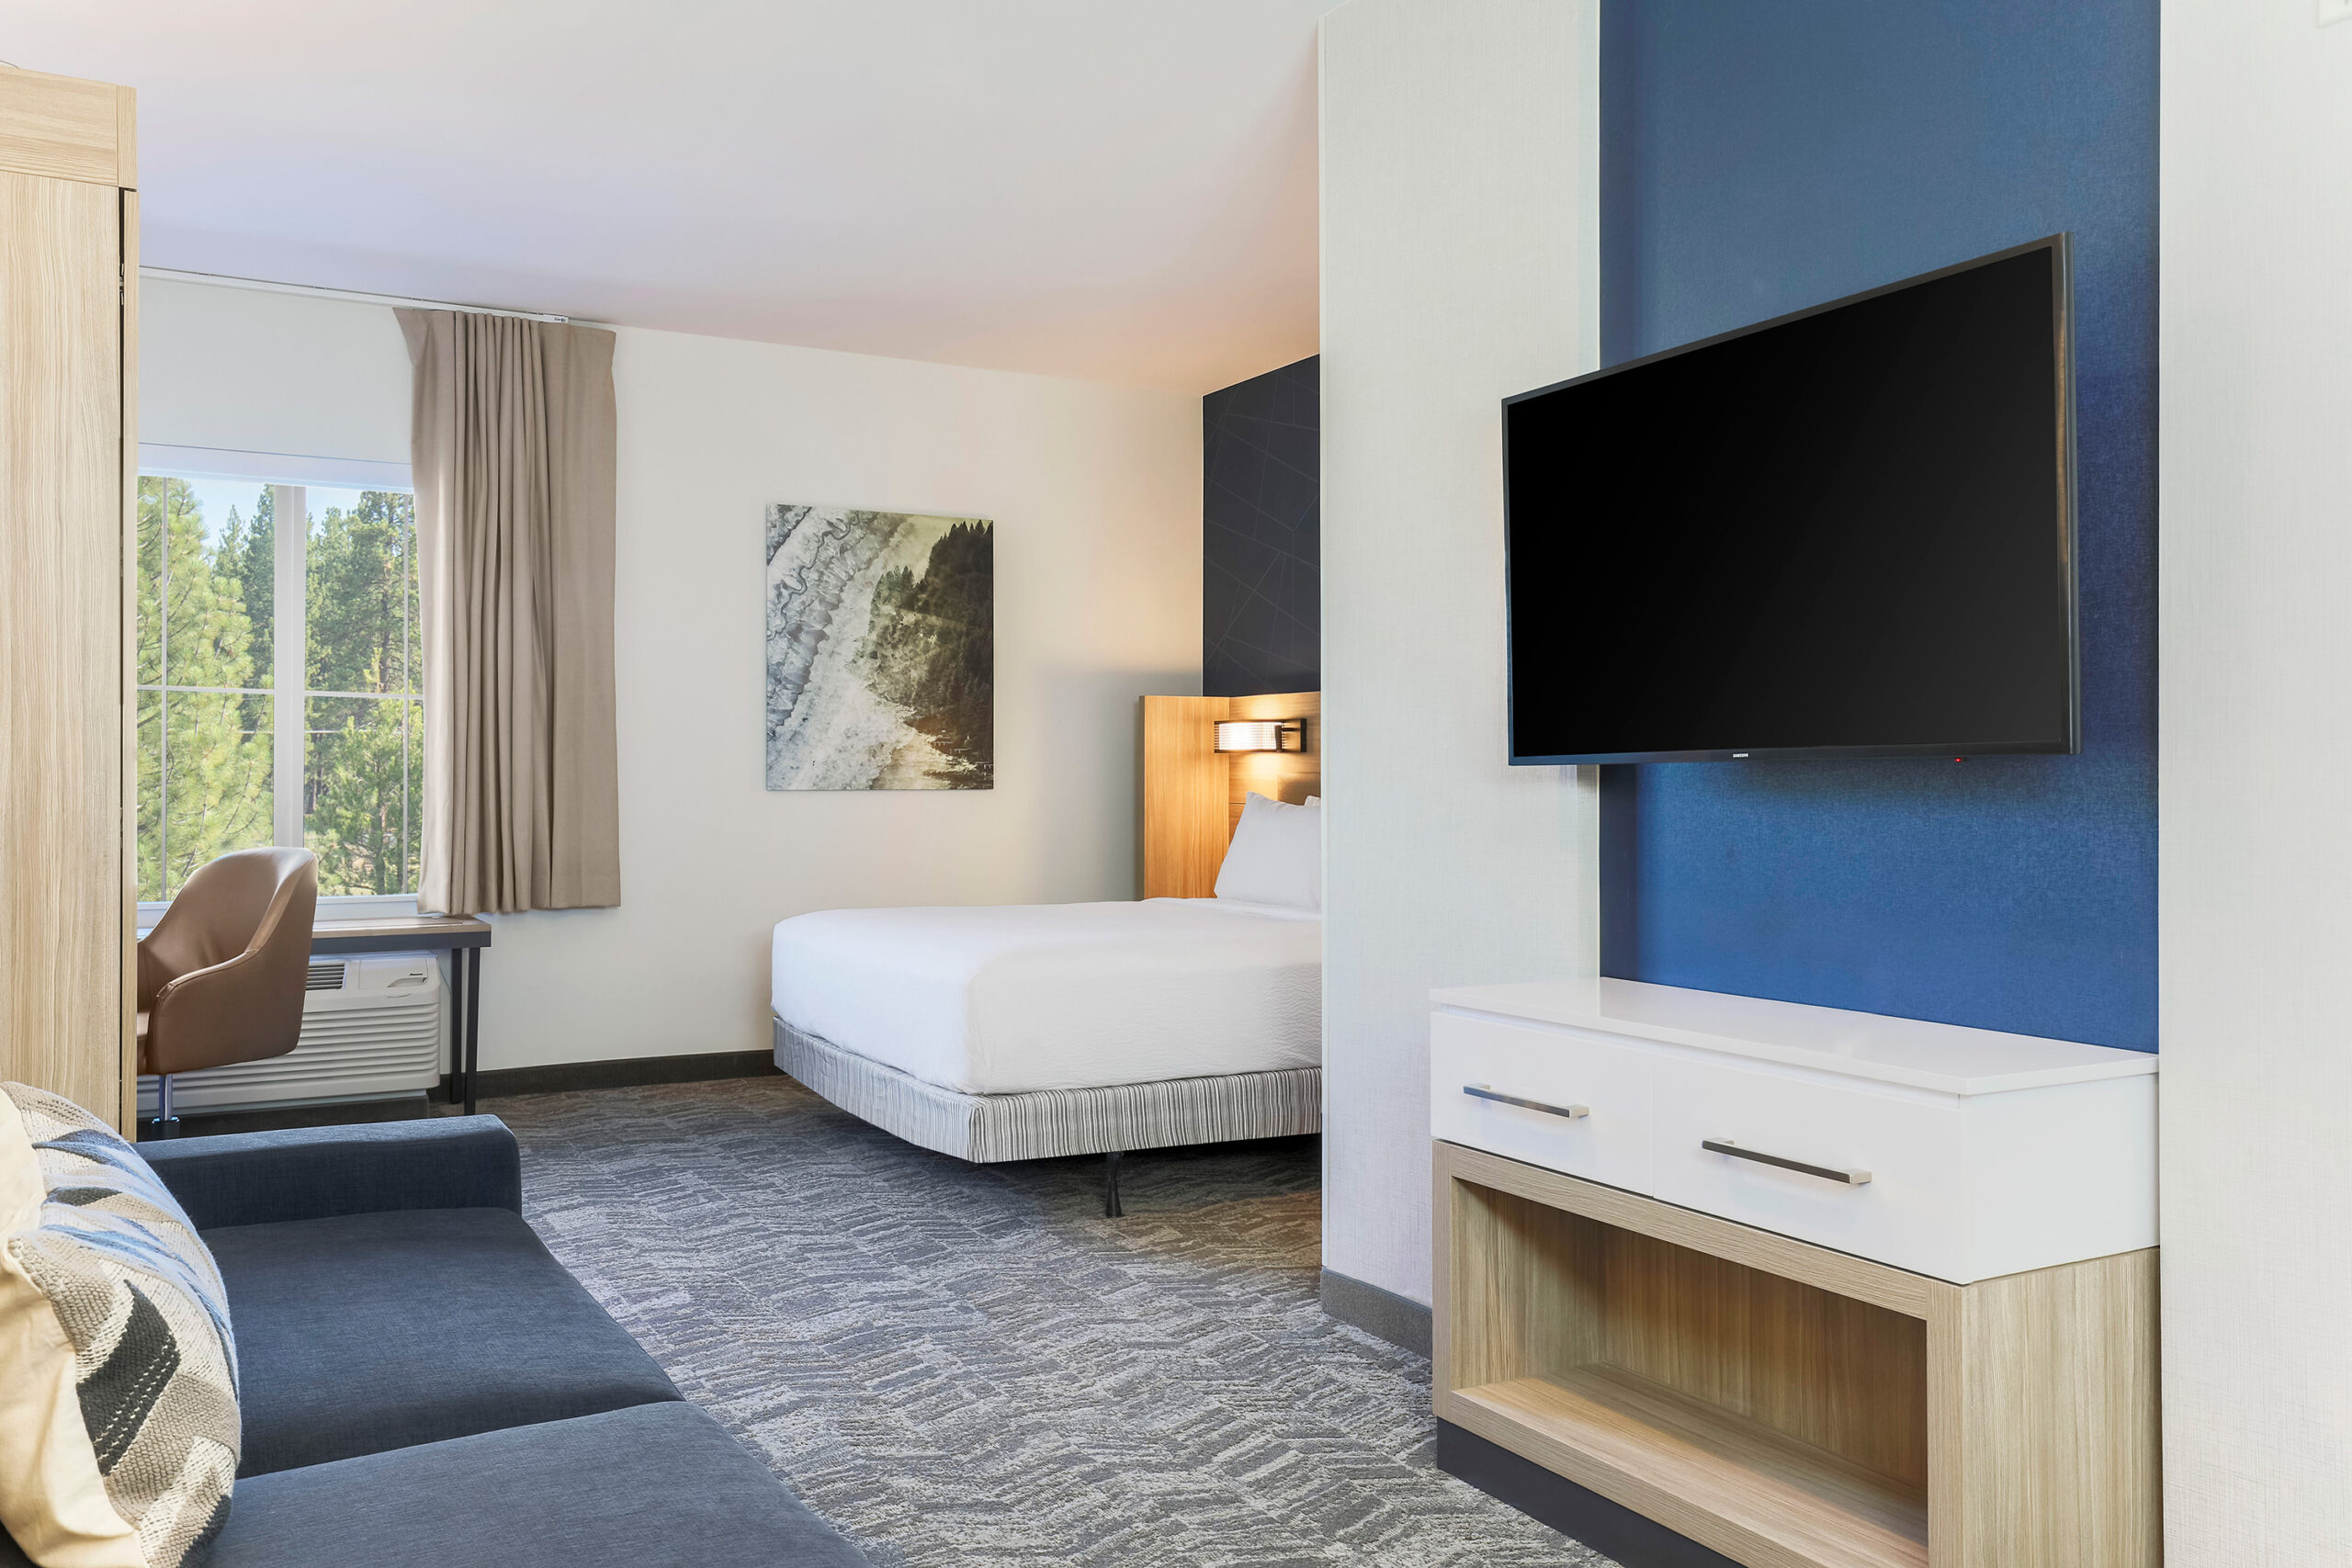 SpringHill Suites by Marriott Truckee